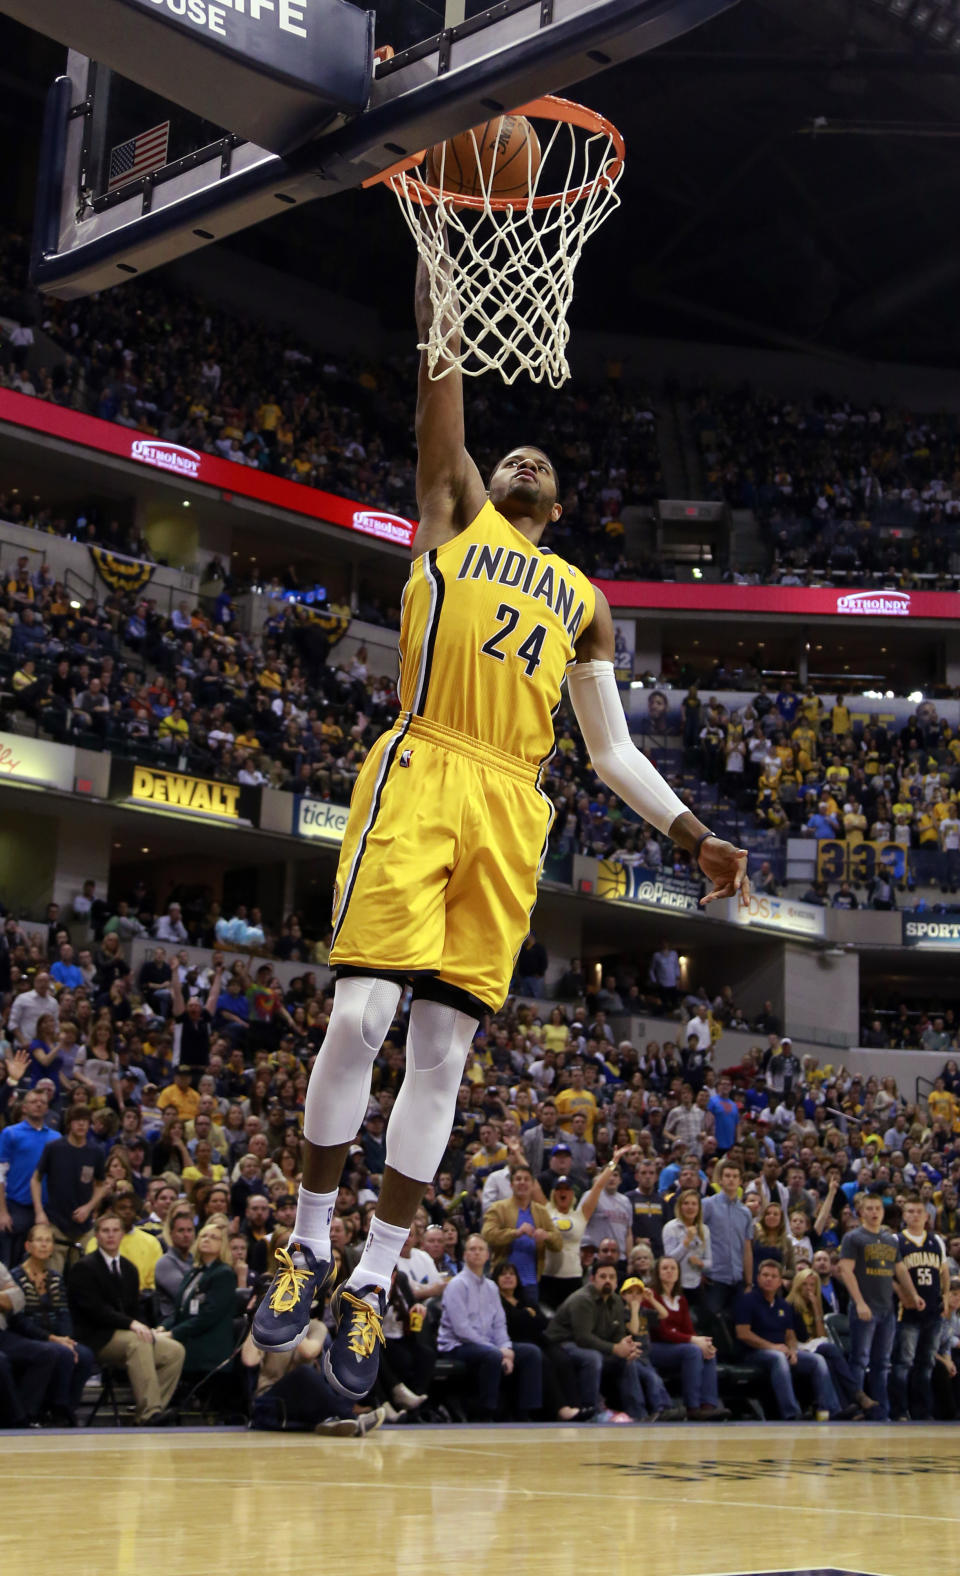 Indiana Pacers forward Paul George (24) dunks the basketball in the second half of an NBA basketball game against the Atlanta Hawks in Indianapolis, Sunday, April 6, 2014. Atlanta won 107-88. (AP Photo/R Brent Smith)